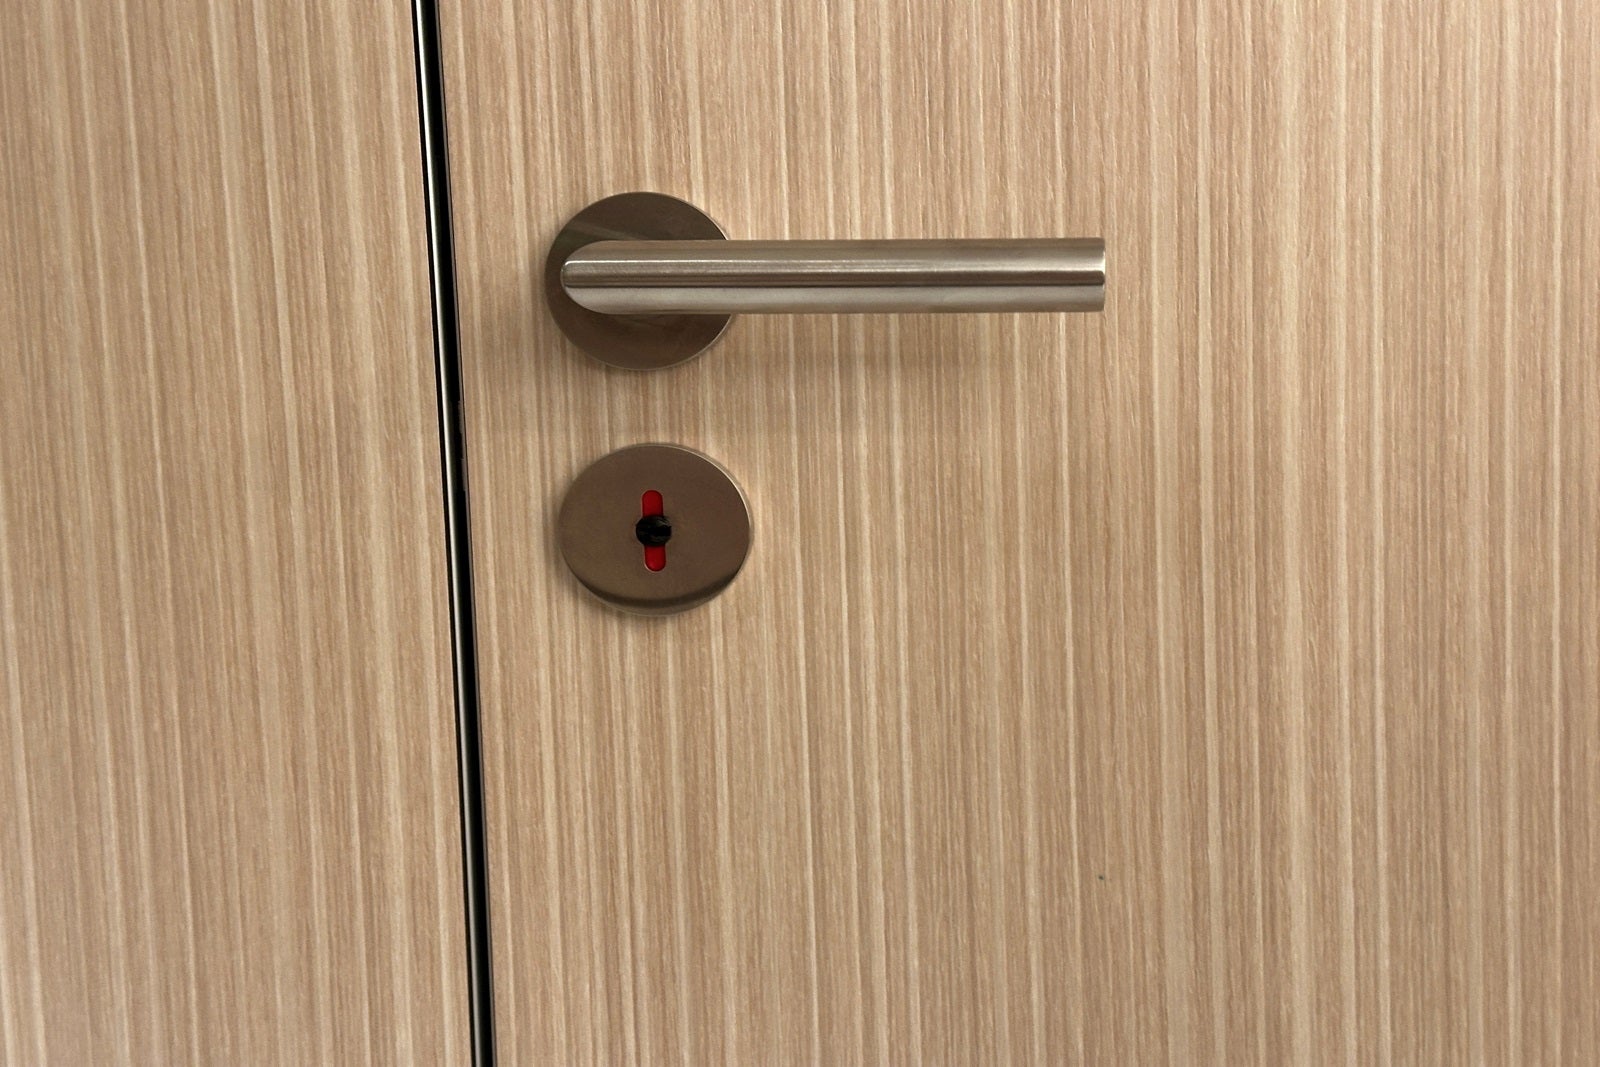 A bathroom stall door handle showing red for occupied